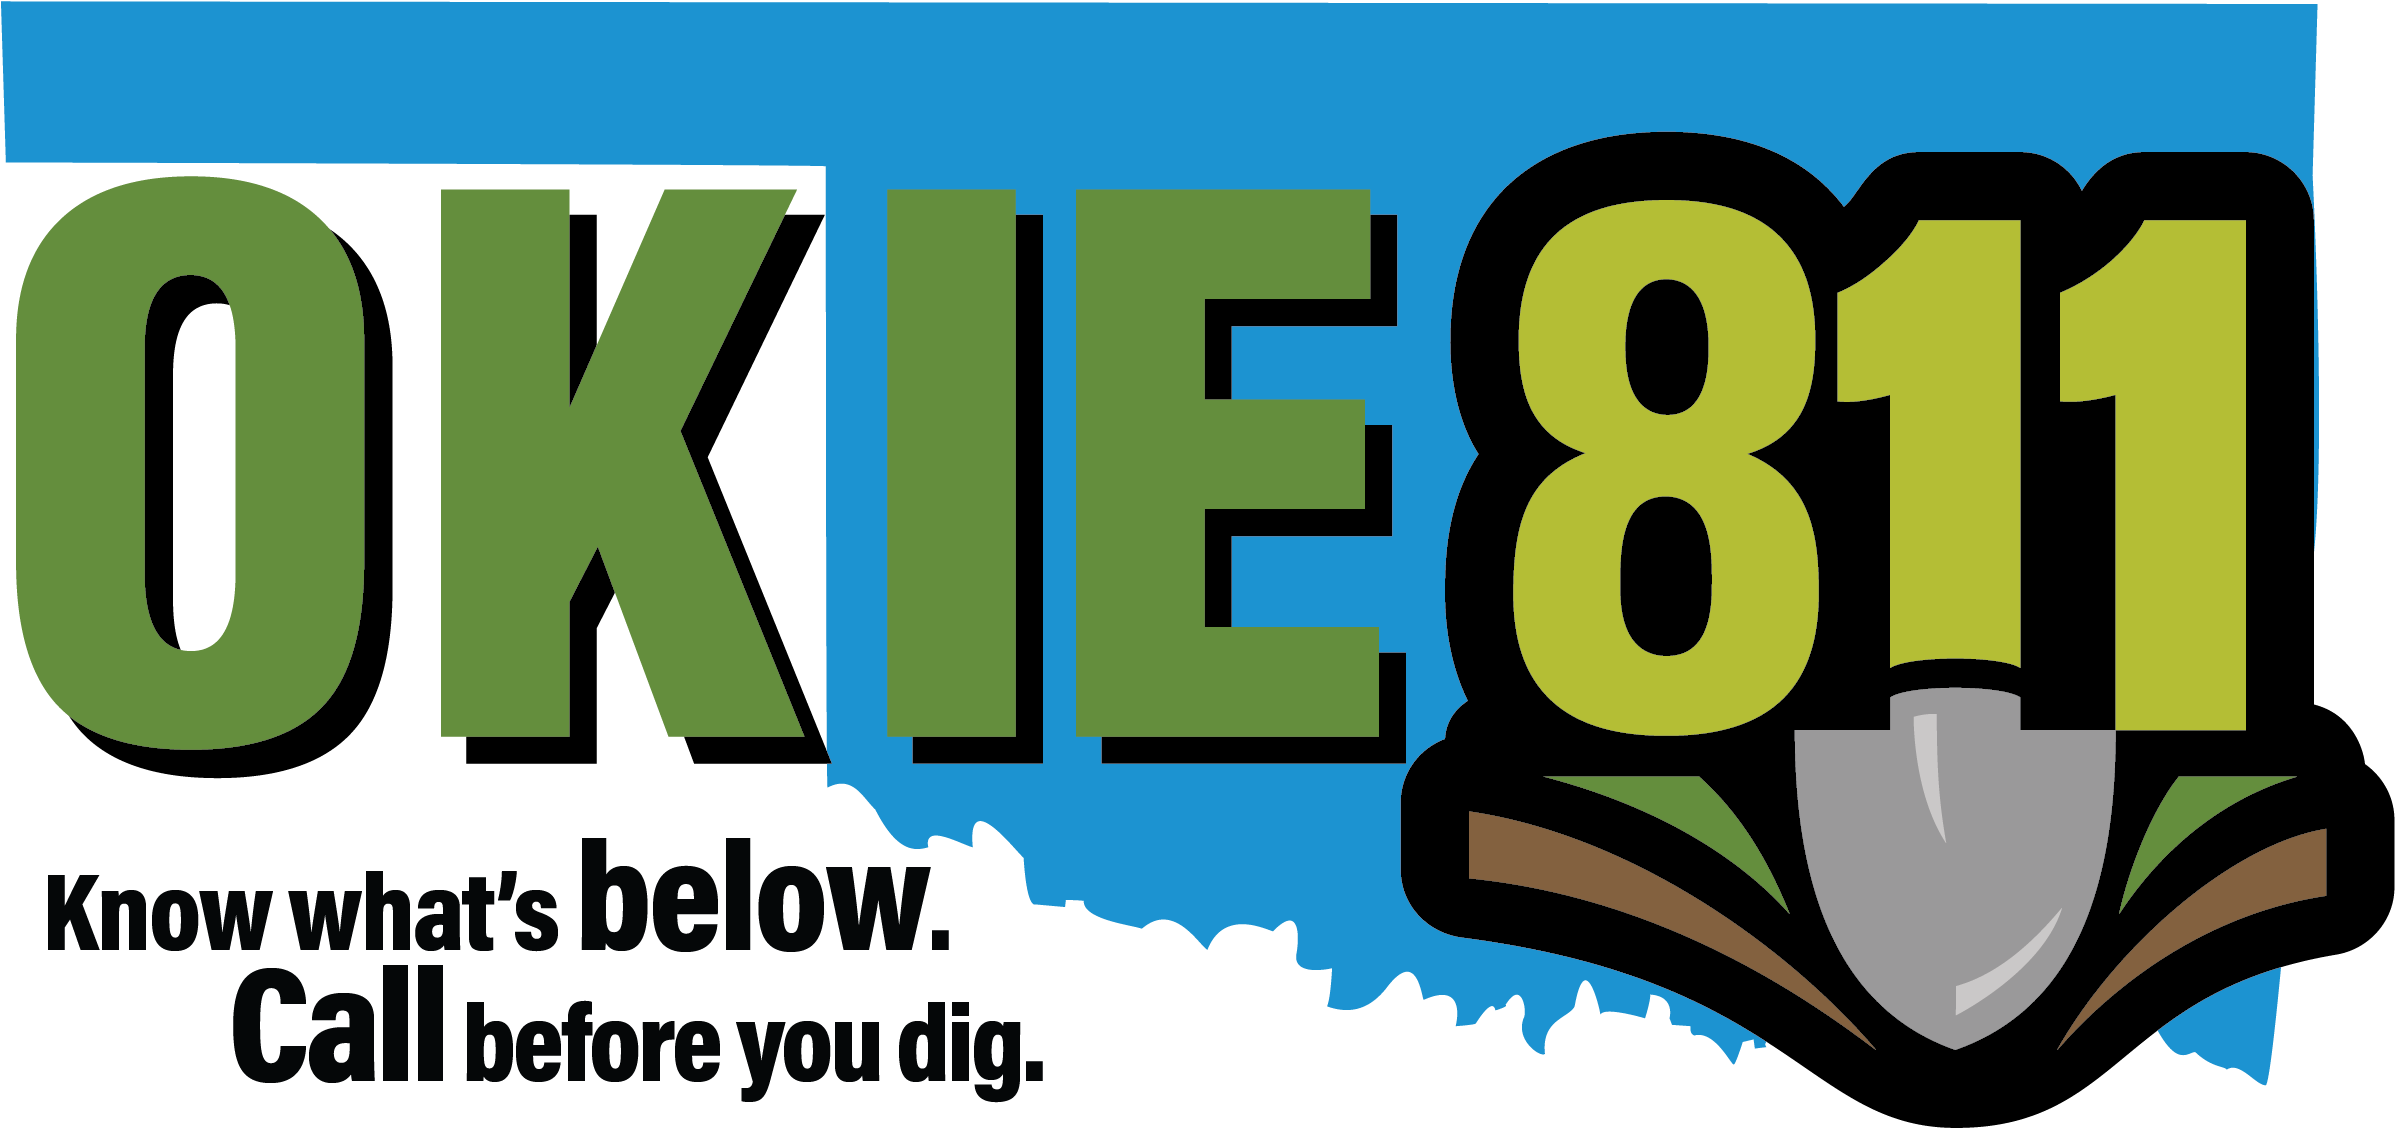 Okie811 Is Oklahoma's One-call System That Manages - Call Before You Dig (2550x1280)